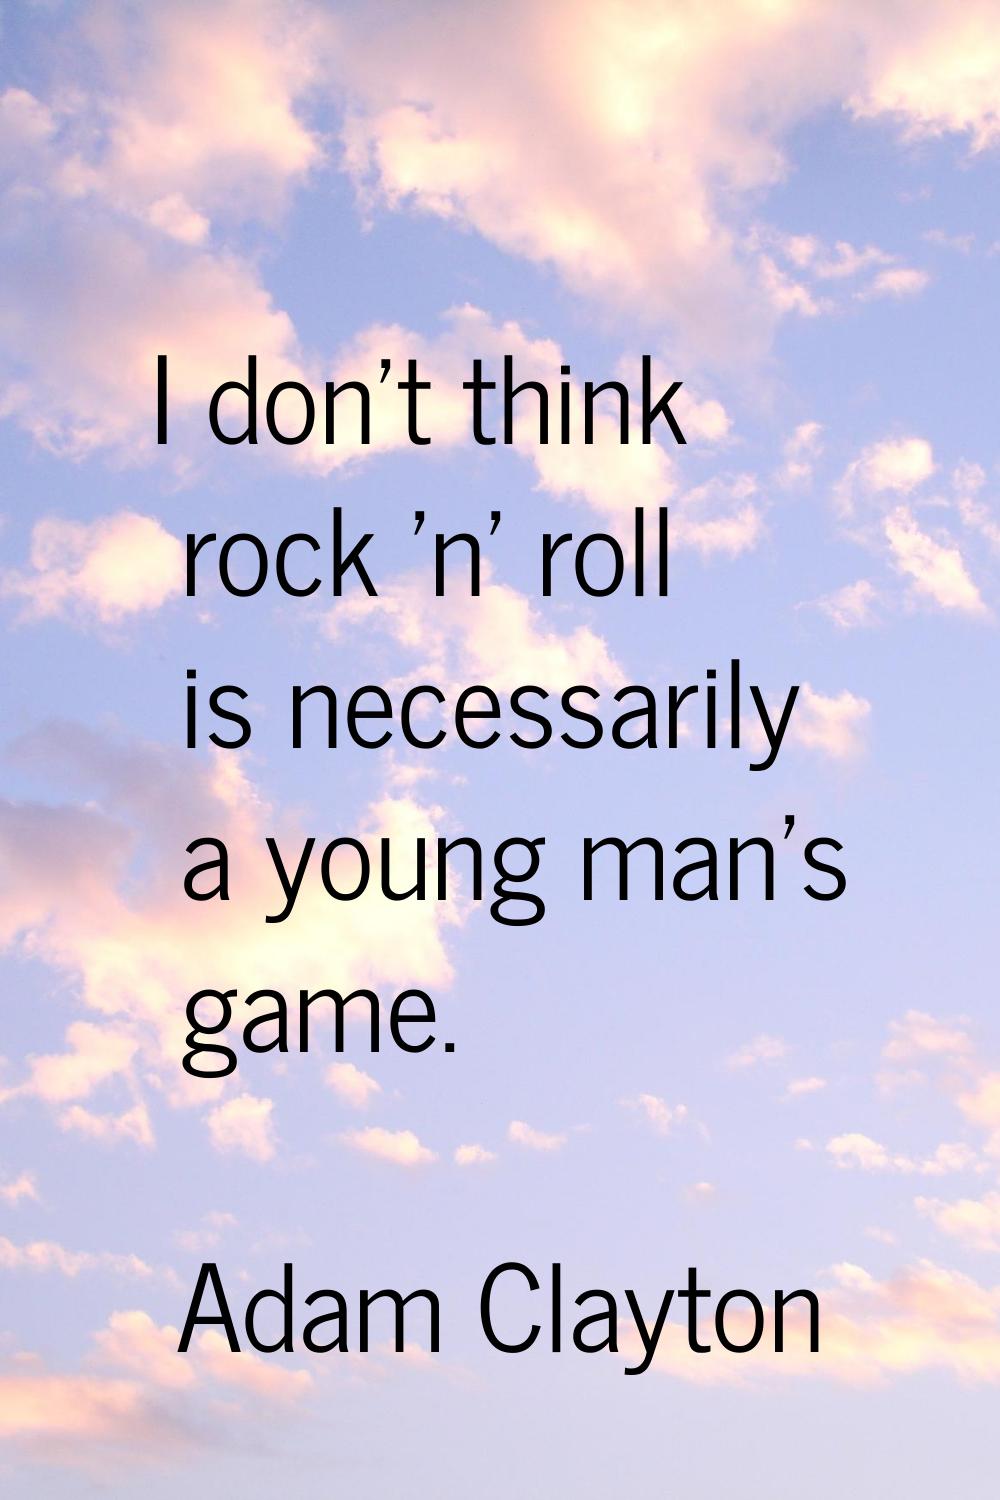 I don't think rock 'n' roll is necessarily a young man's game.